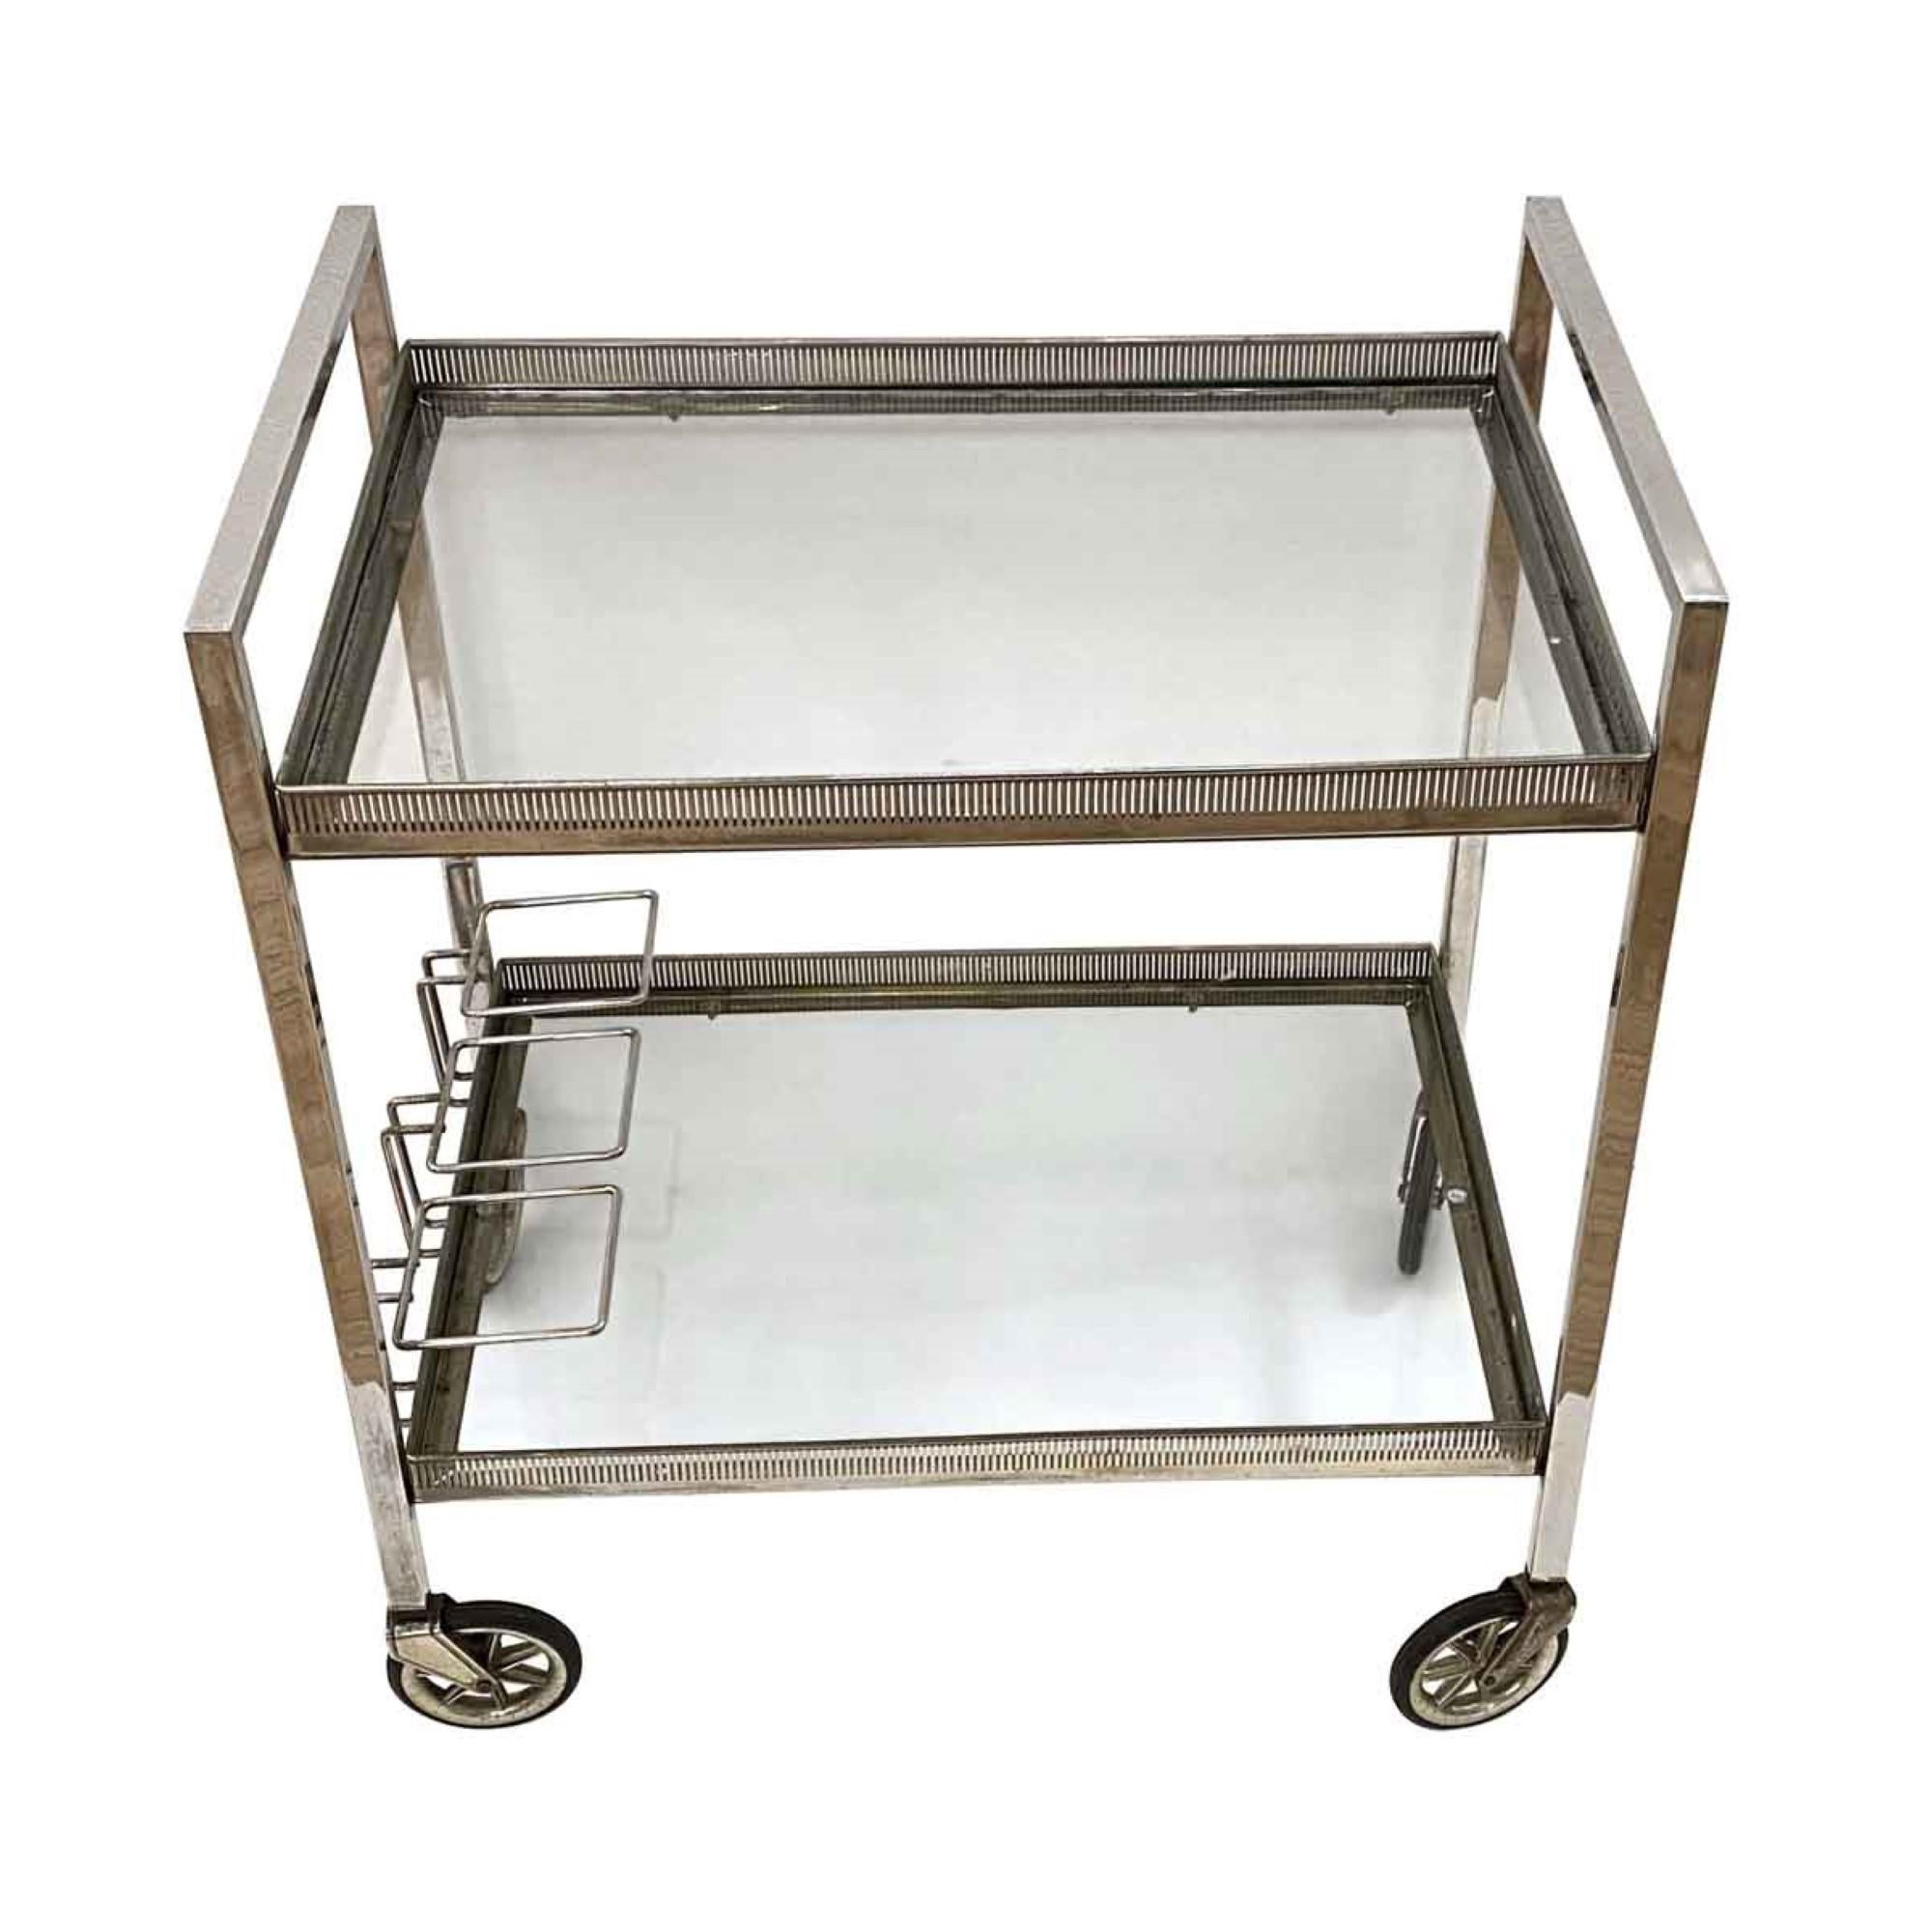 1990s Belgium Mid-Century Modern bar cart made of nickel over brass with glass shelves. This can be seen at our 333 West 52nd St location in the Theater District West of Manhattan.